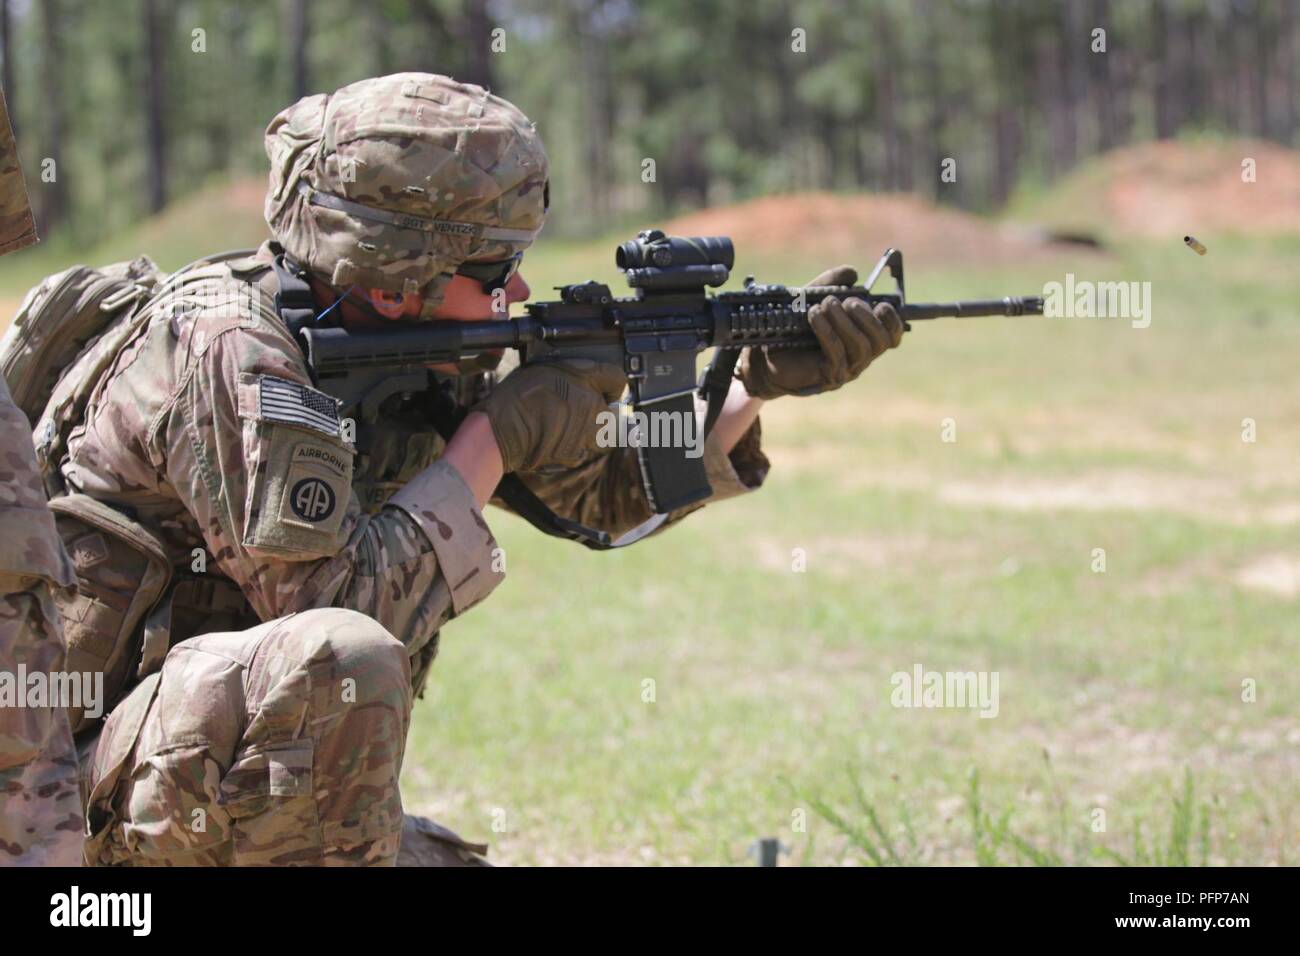 A U.S. Army paratrooper assigned to the 82nd Airborne Division fires an M4 Carbine during the last day of the Small Arms Competition as part of All American Week XXIX at Fort Bragg, North Carolina, May 23, 2018.  Paratroopers past and present converged on the center of the military universe to celebrate being members of the “All American” Division and America’s Guard of Honor. Stock Photo